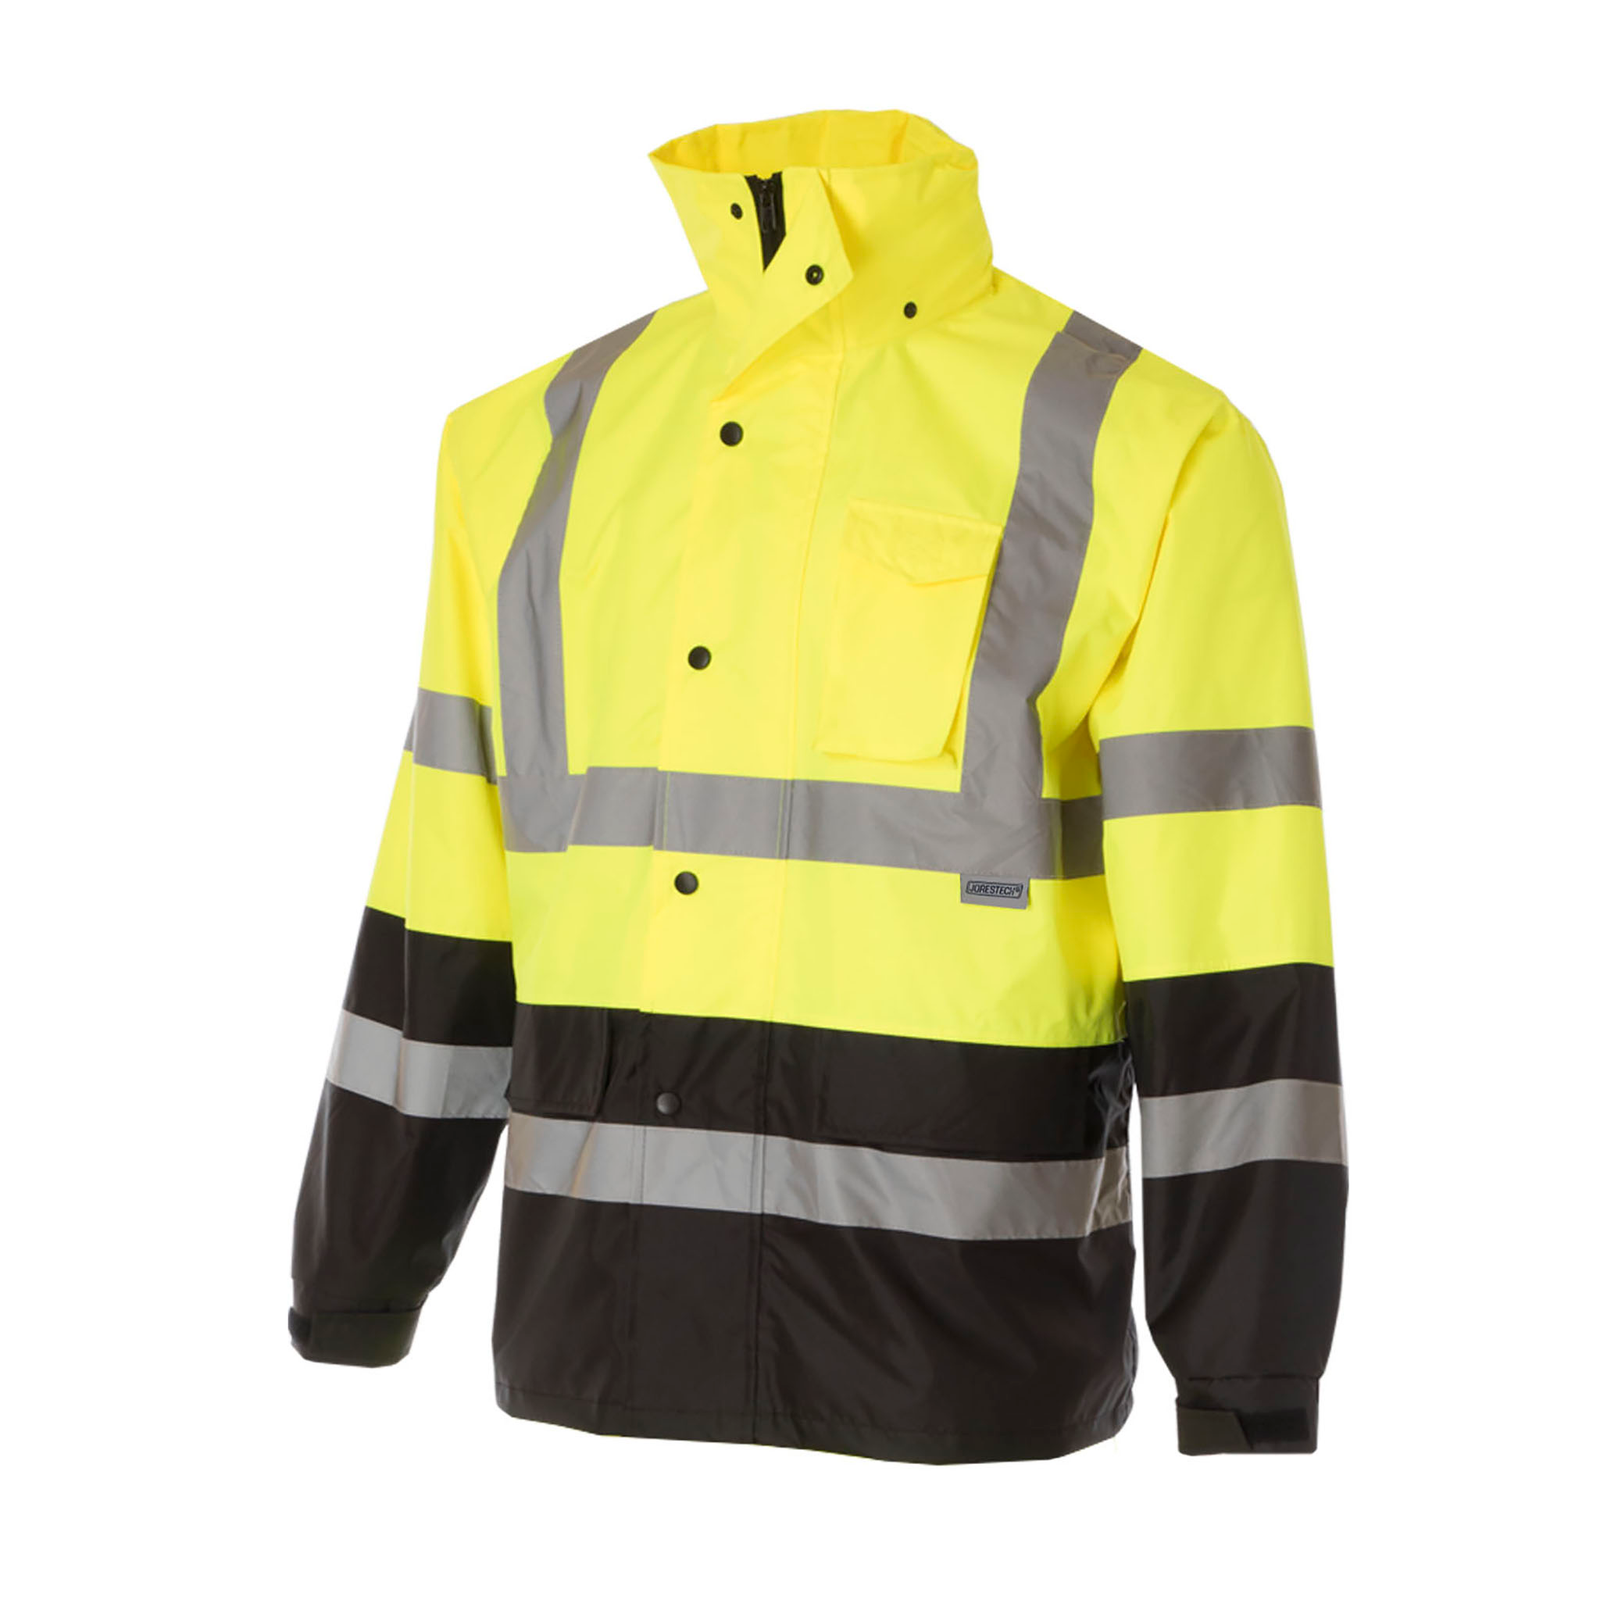 Diagonal view of a JORESTECH High visibility yellow and black rain jacket with 2 inches reflective strips and hideaway hoddie